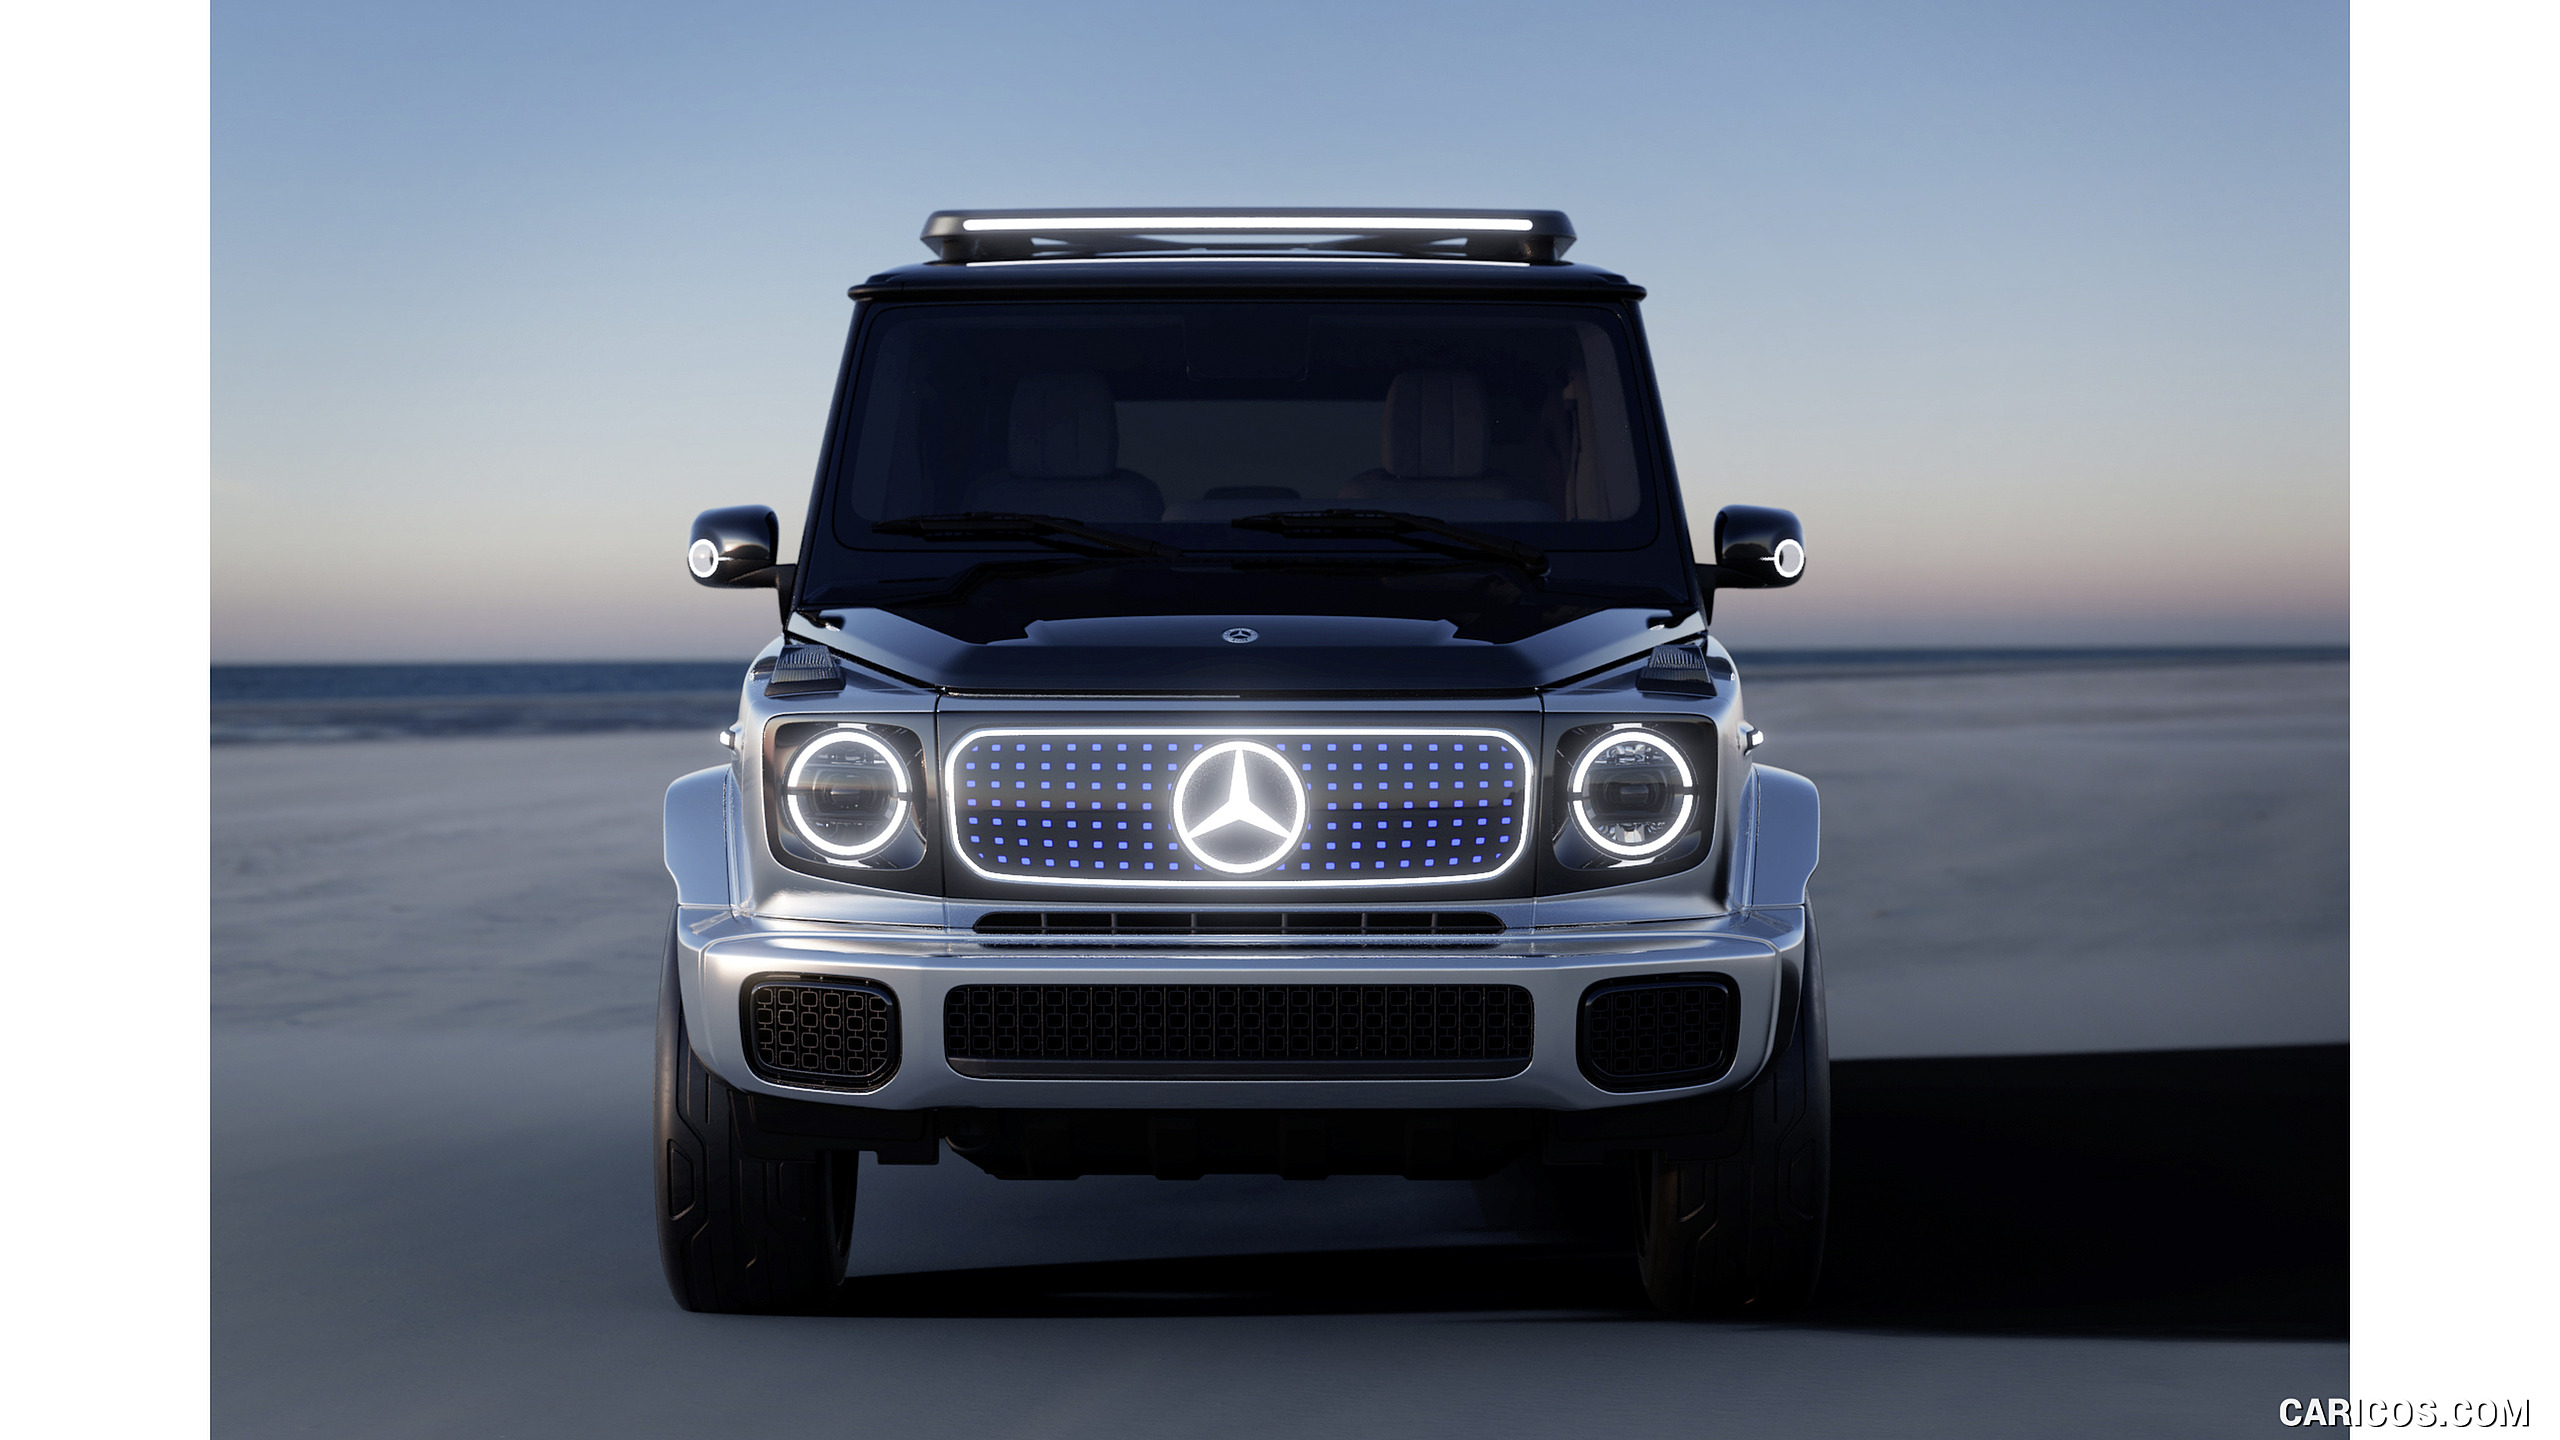 2021 Mercedes-Benz EQG Electric G-Class Concept - Front, #5 of 19